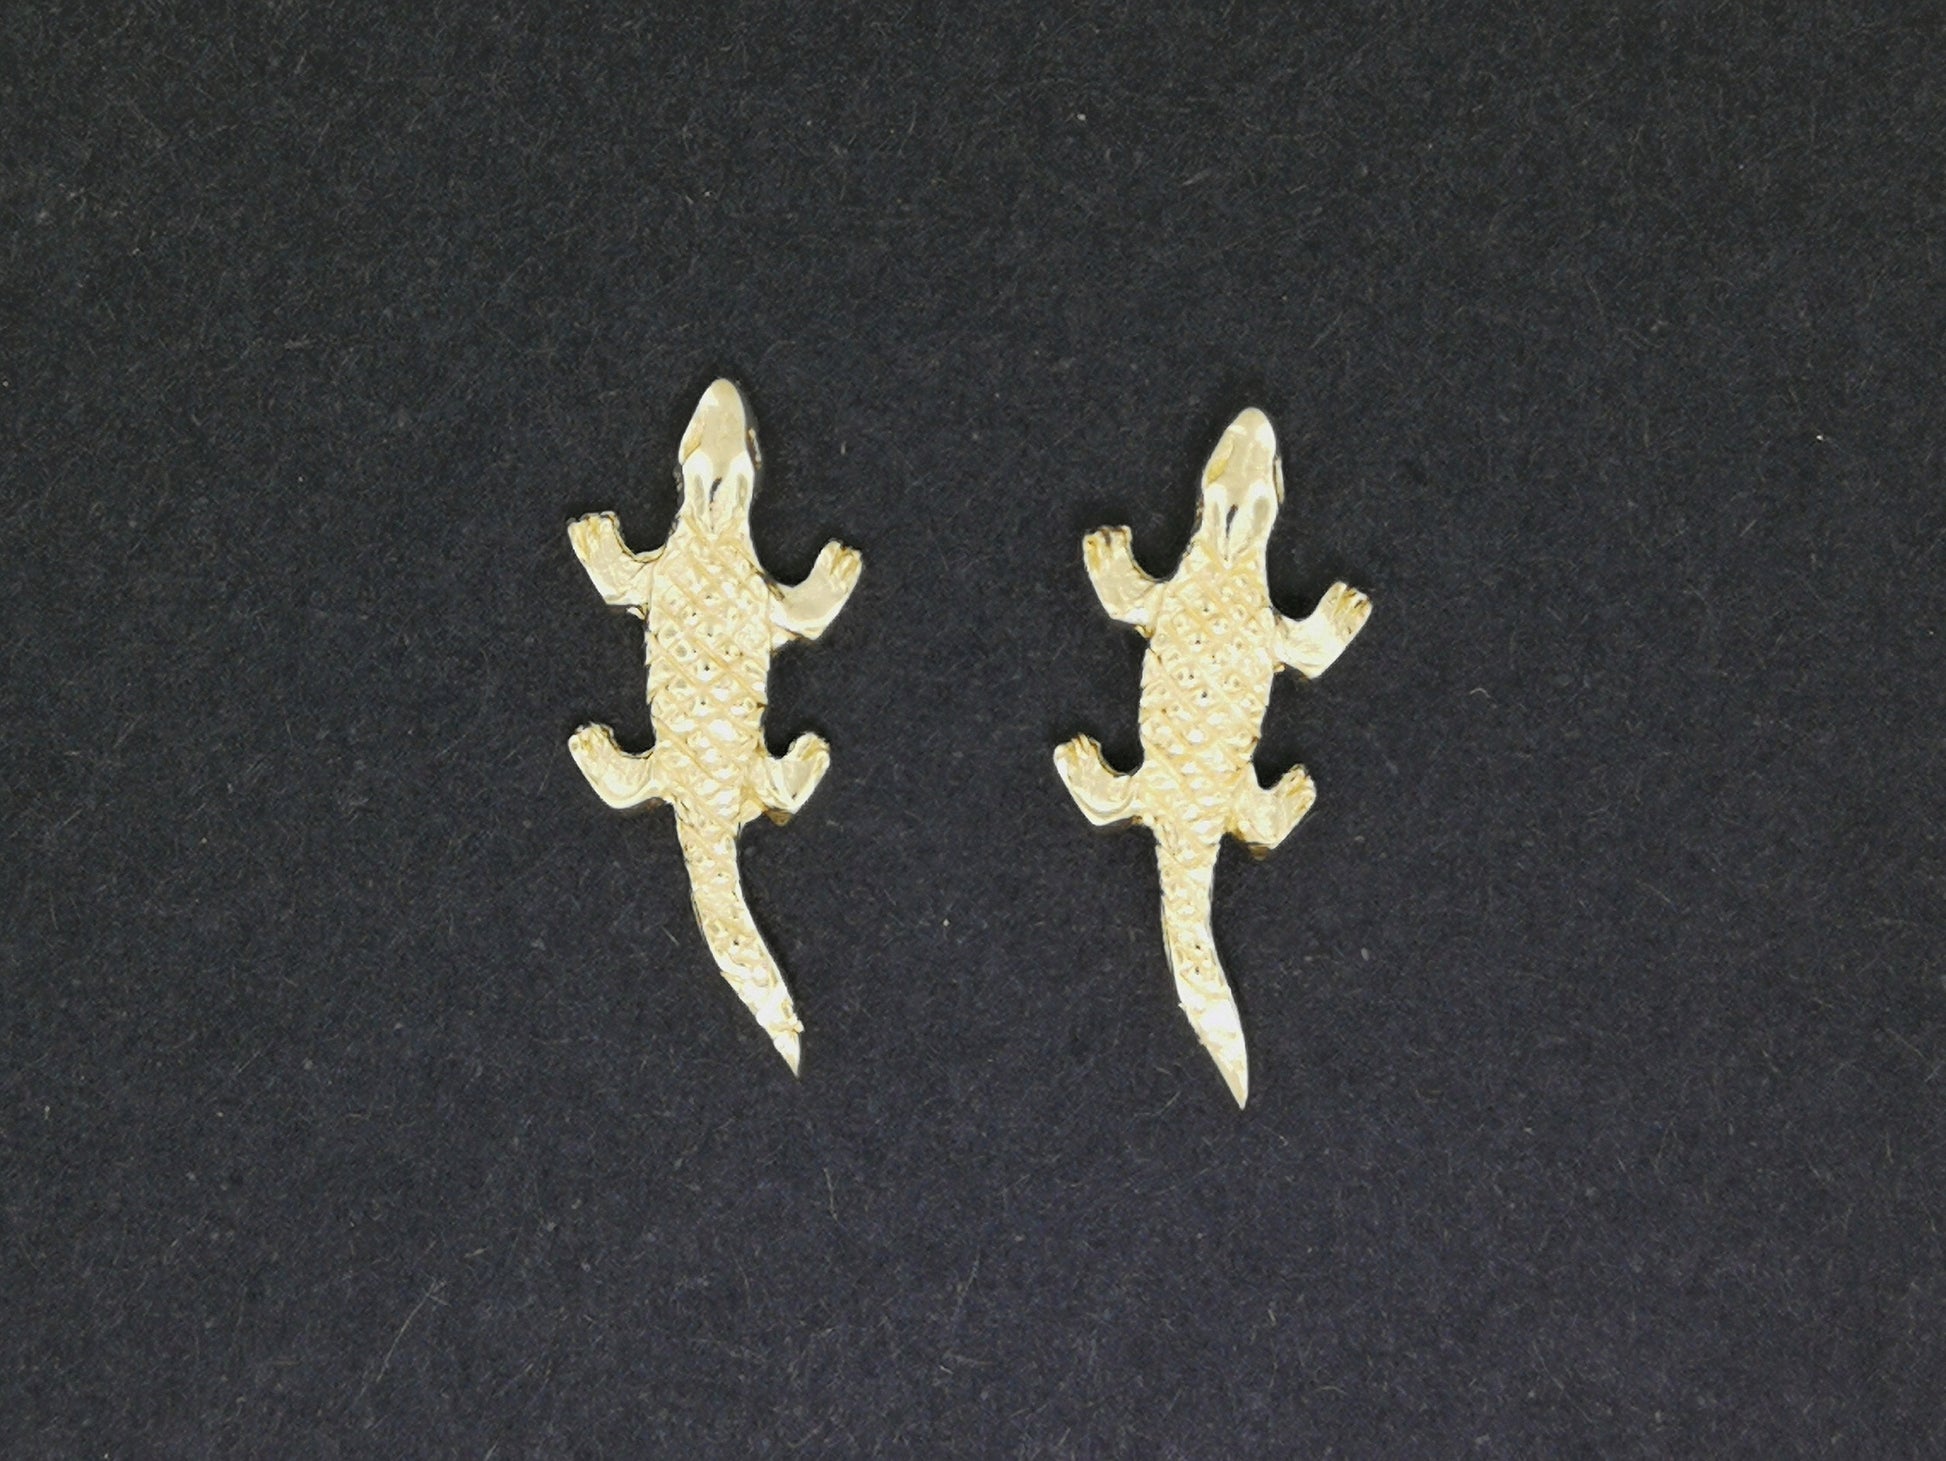 Gold Alligator Stud Earrings made to order, Gold Alligator Earrings, Gold Alligator Studs, Gold Alligator Stud Earrings, Gold Animal Earrings, Gold Animal Jewelry, Gold Reptile Jewelry, Gold Reptile Jewellery, Gold Reptile Earrings, Gold Alligator Jewelry, Gold Alligator Jewellery, Gold Gator Earrings, Gold Gator Jewelry, Gold Gator Jewellery